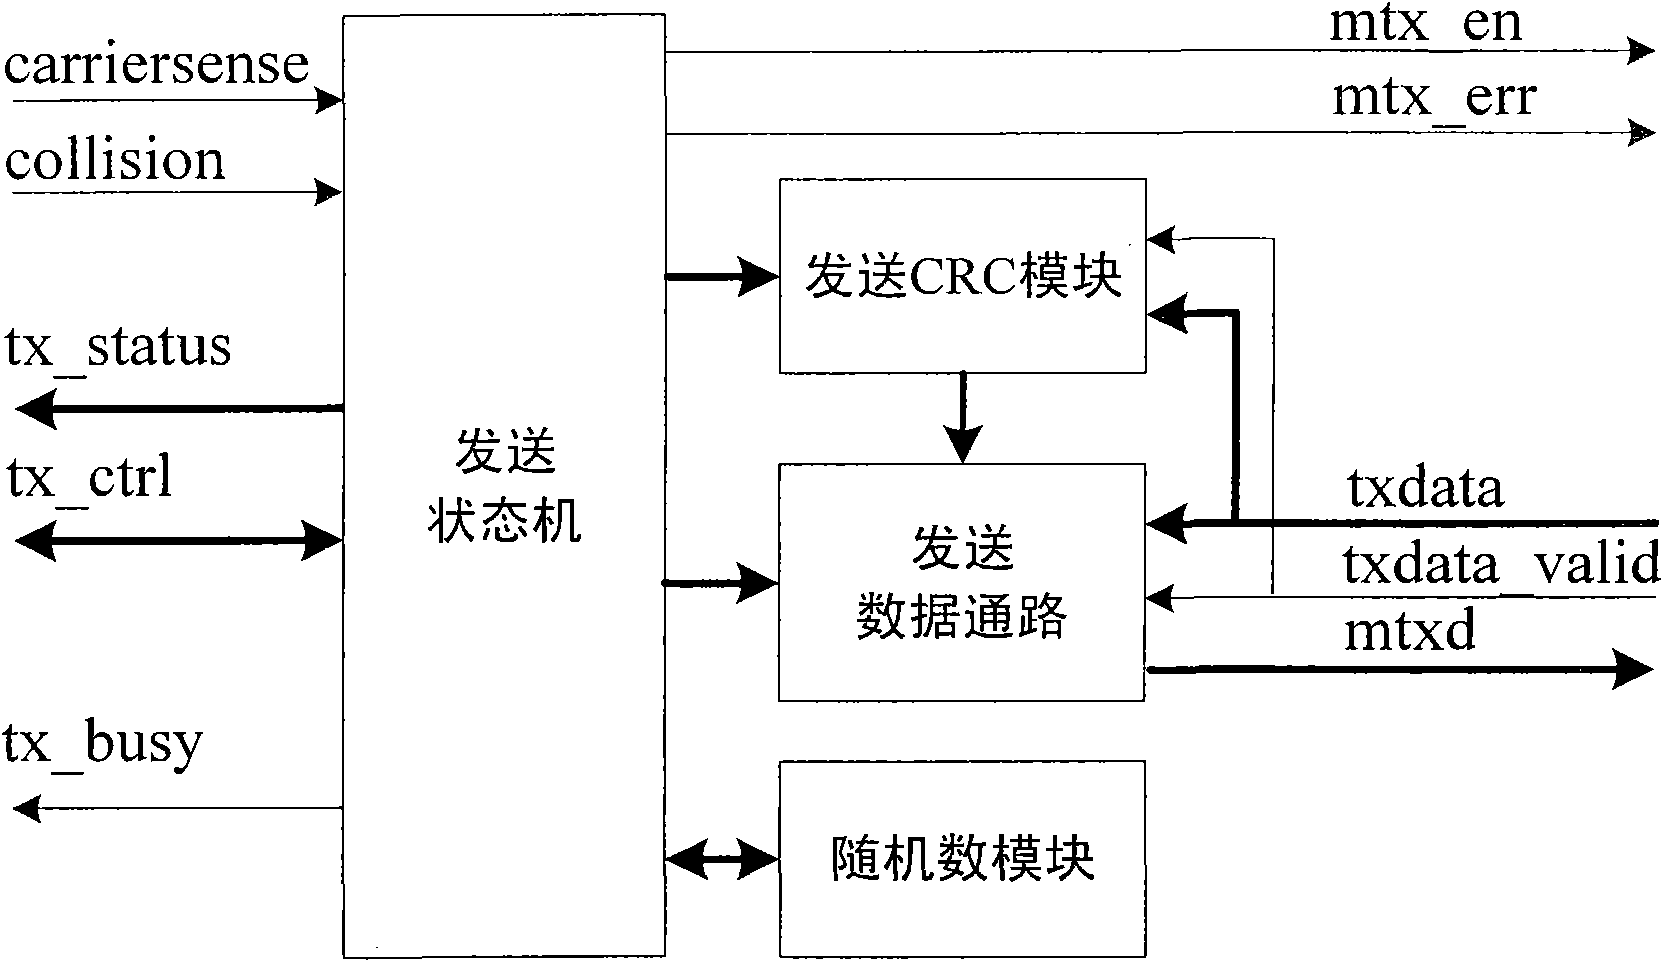 Ethernet MAC (Media Access Control) sublayer controller applicable to WLAN (Wireless Local Area Network)